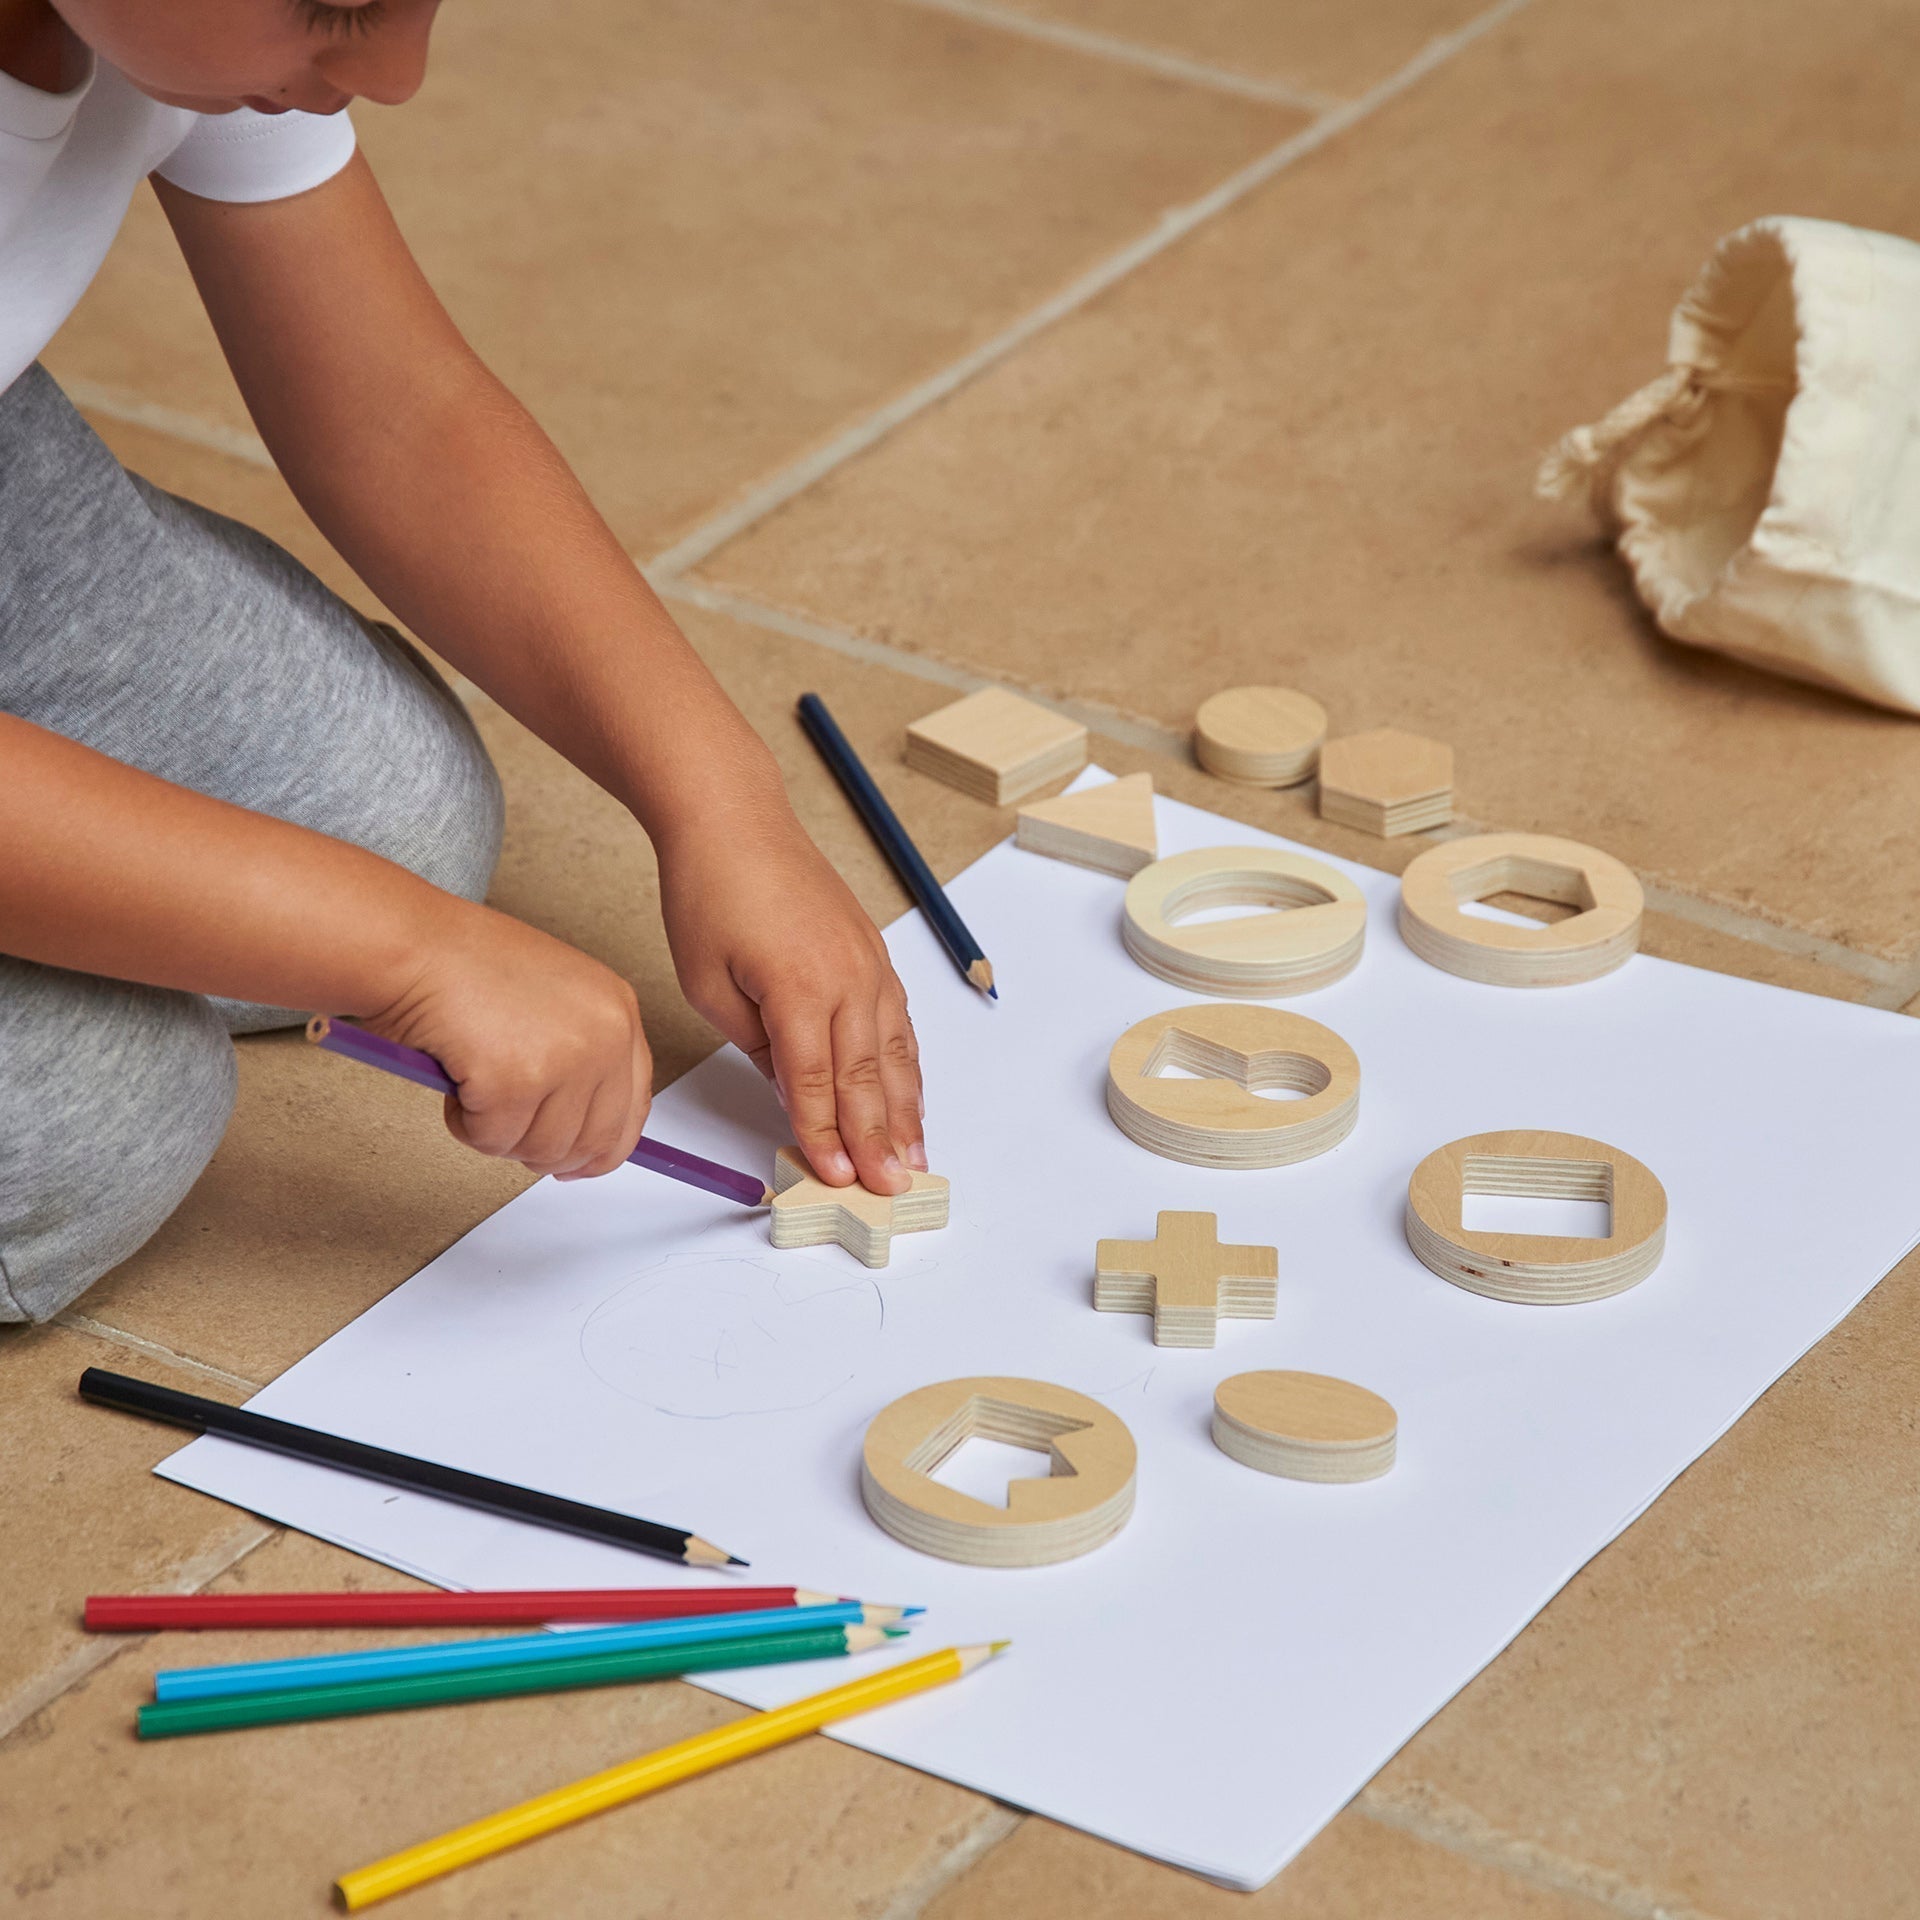 Inside Outside Wooden Shapes, Our TickiT® Inside Outside Wooden Shapes provide exciting and stimulating fun for your child to explore shape sorting and puzzle solving. A set of 14 smooth and tactile wooden discs, each with a different shape cut out and nested inside, which your child can take out for tracing, drawing around or pattern making. Each 1.2cm thick removable shape is chunky and easy for small hands to manipulate. With 7 geometric shapes (circle, oval, semicircle, triangle, square, rectangle and h